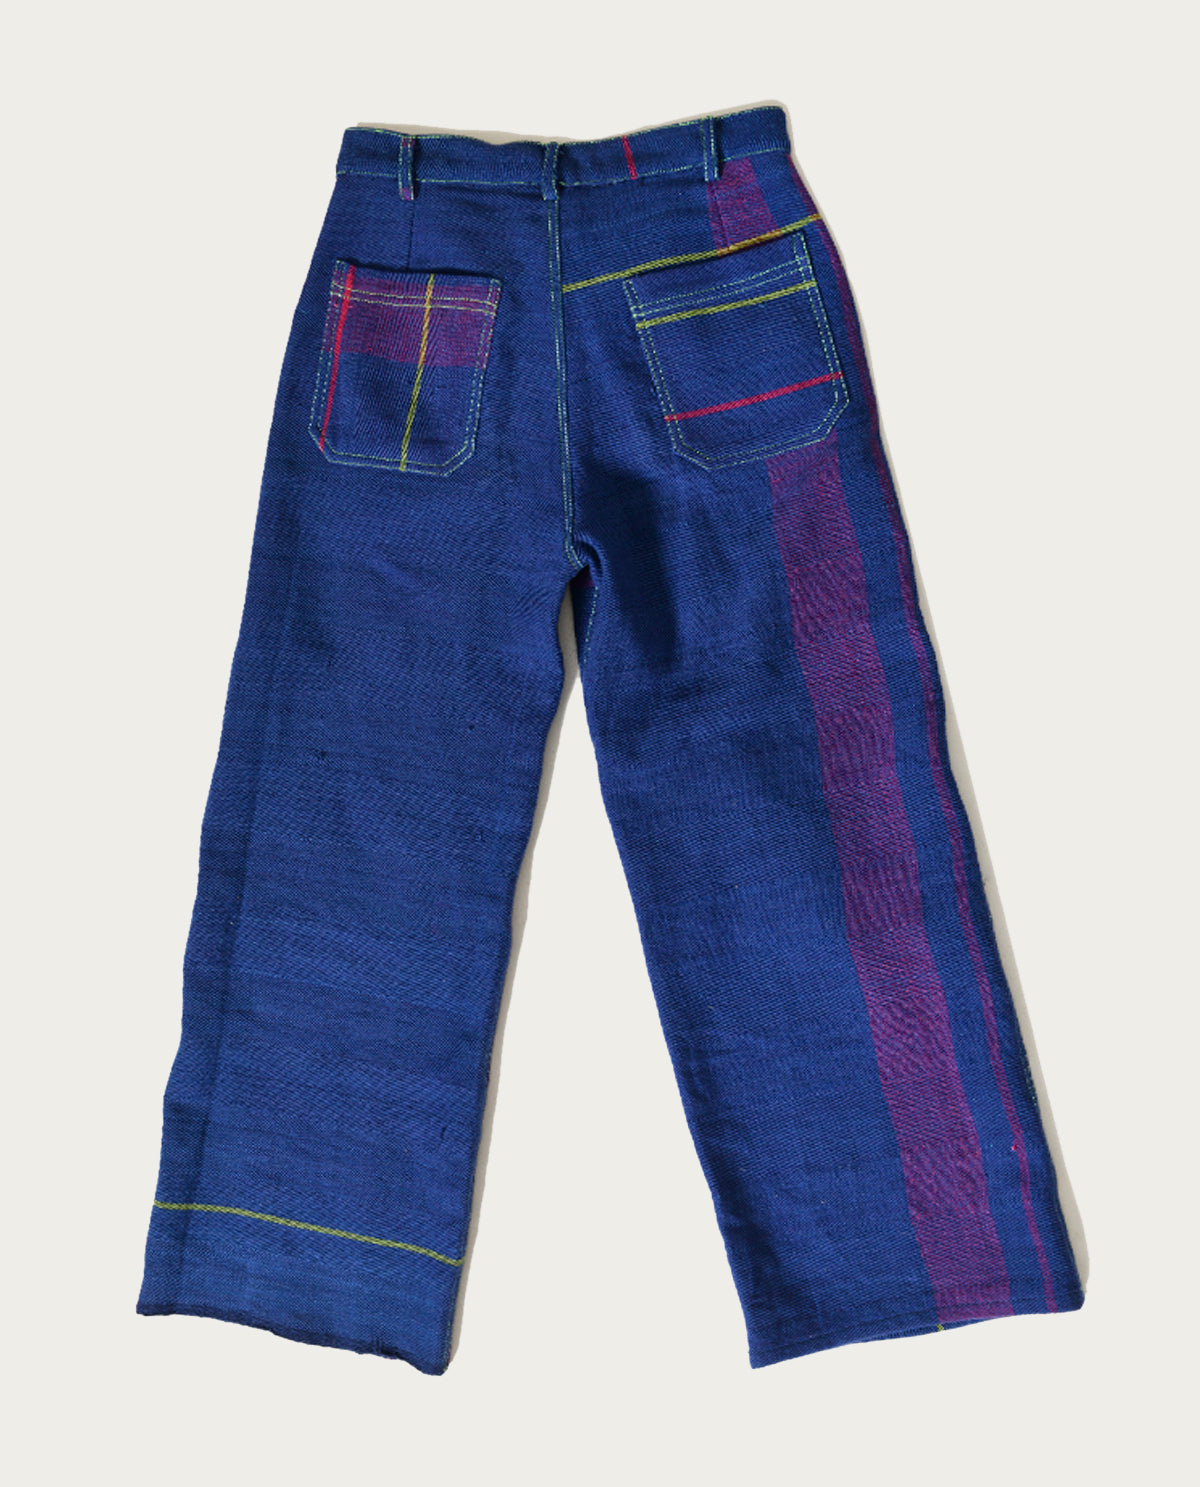 Recycled Blue Striped Cargo Pants by Rias Jaipur with 100% Cotton, Blue, Casual wear, Multicolor, Natural, Pants, RE 2.O, RE 2.O by Rias Jaipur, Regular, Stripes, Unisex, Womenswear at Kamakhyaa for sustainable fashion